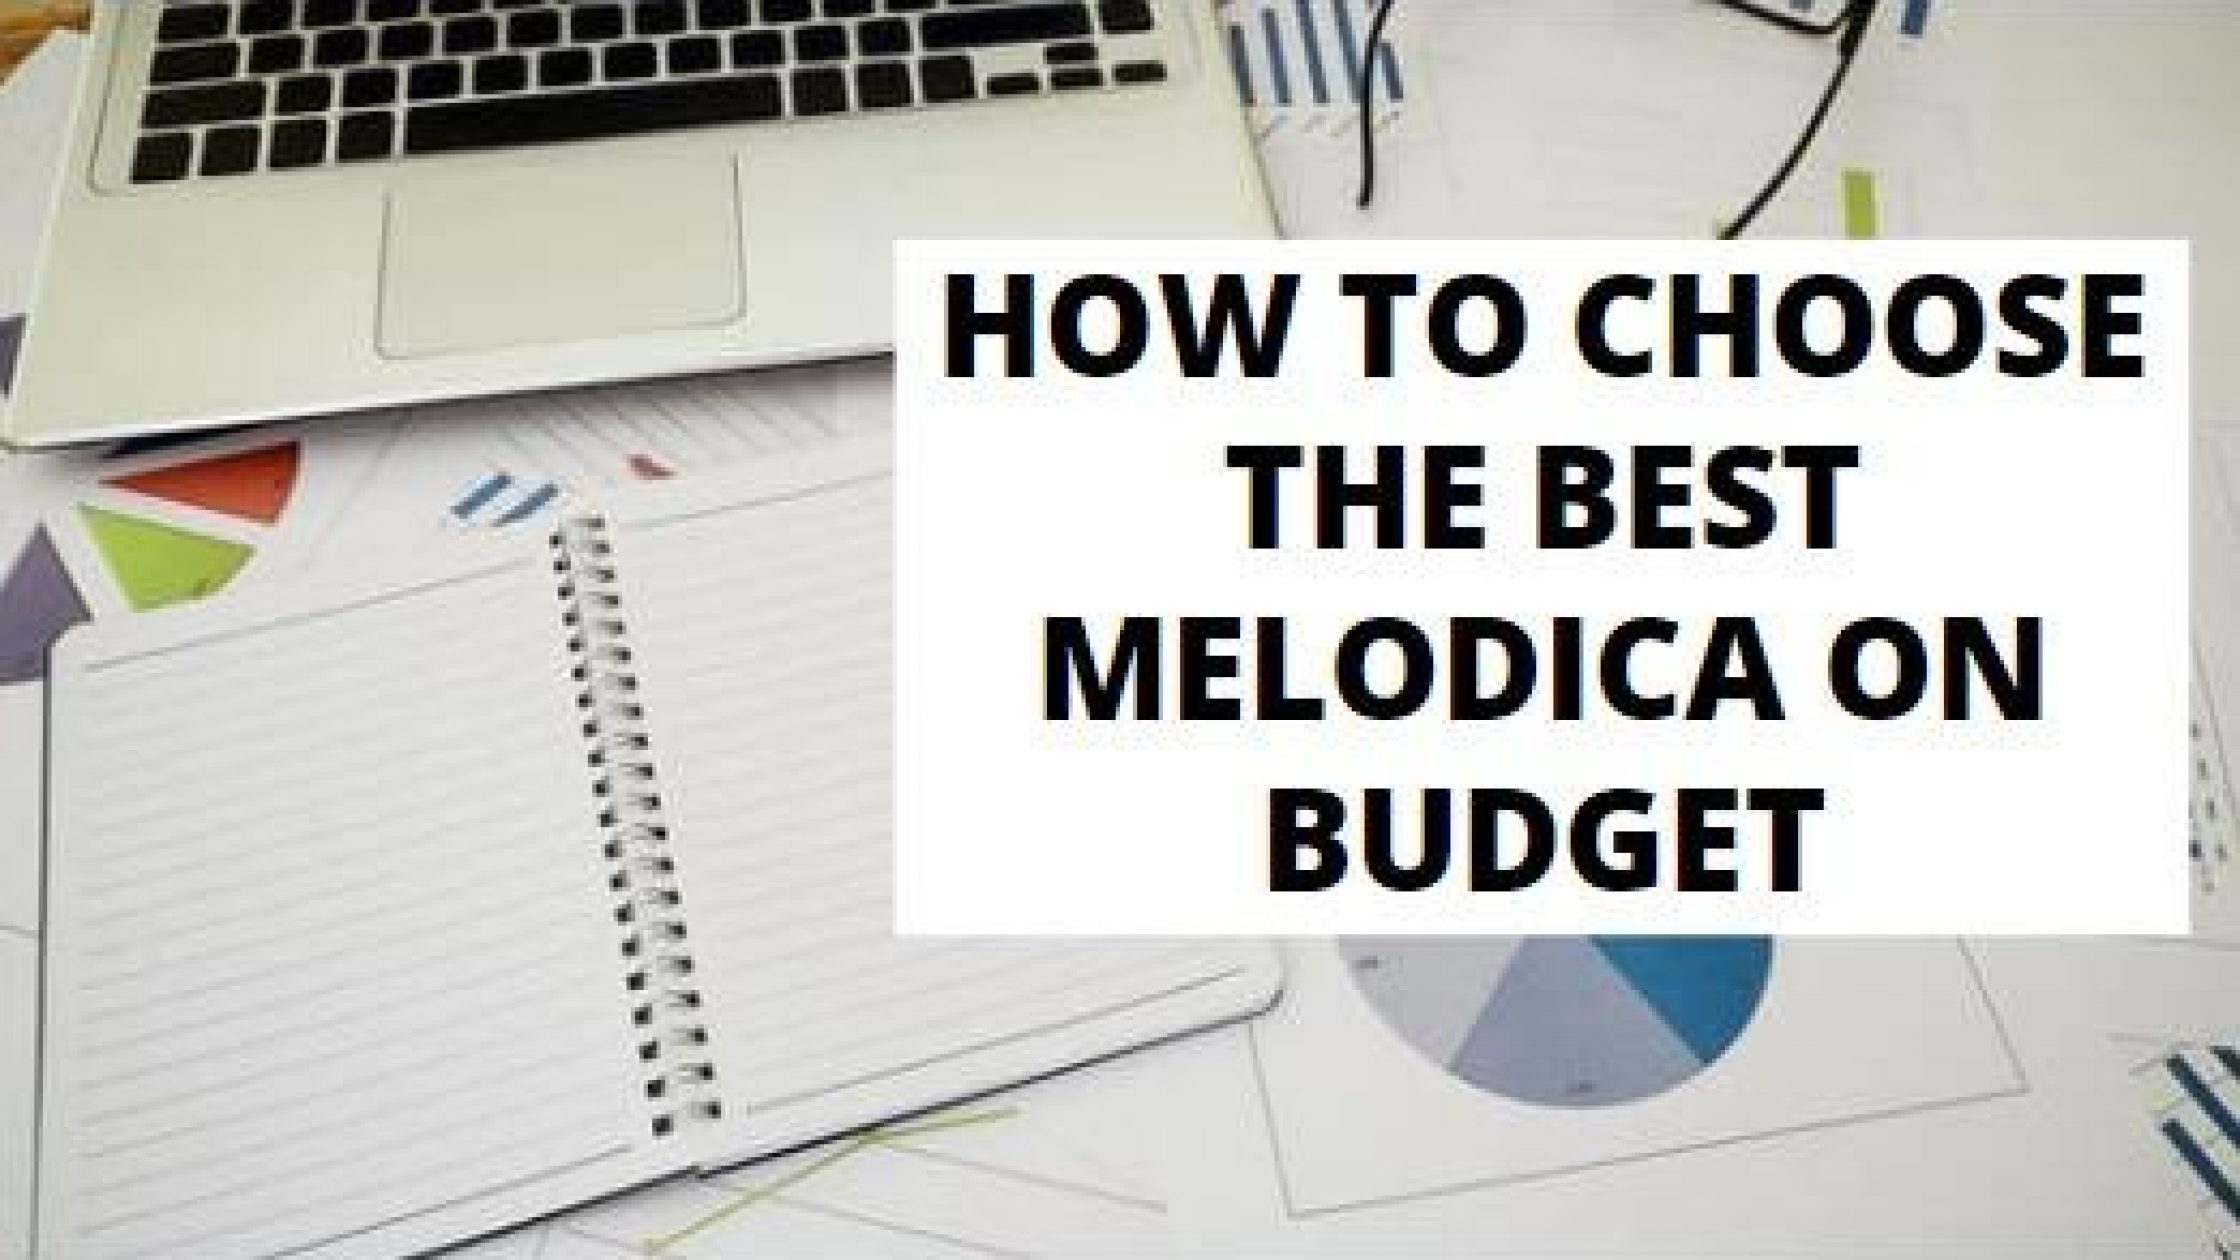 How To Choose The Best Melodica On Budget: 15 Budget Melodica